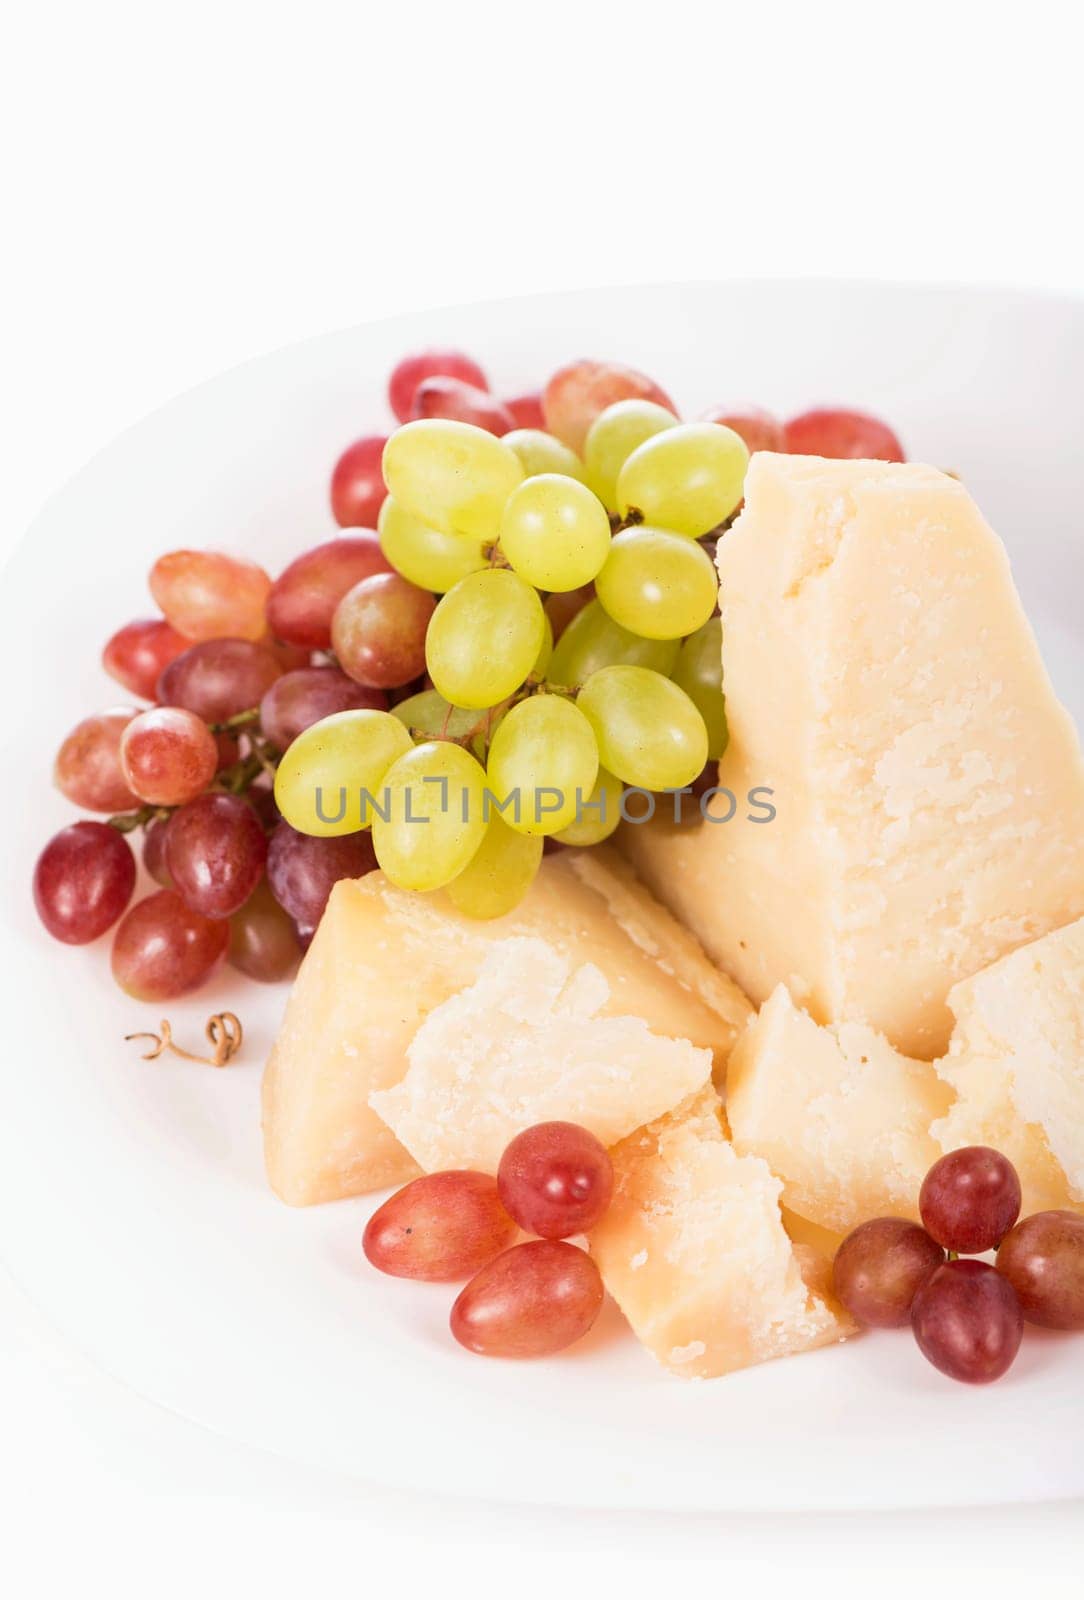 grapes and parmesan. Parmesan cheese and grapes isolated on a white backgroun. View from above by aprilphoto